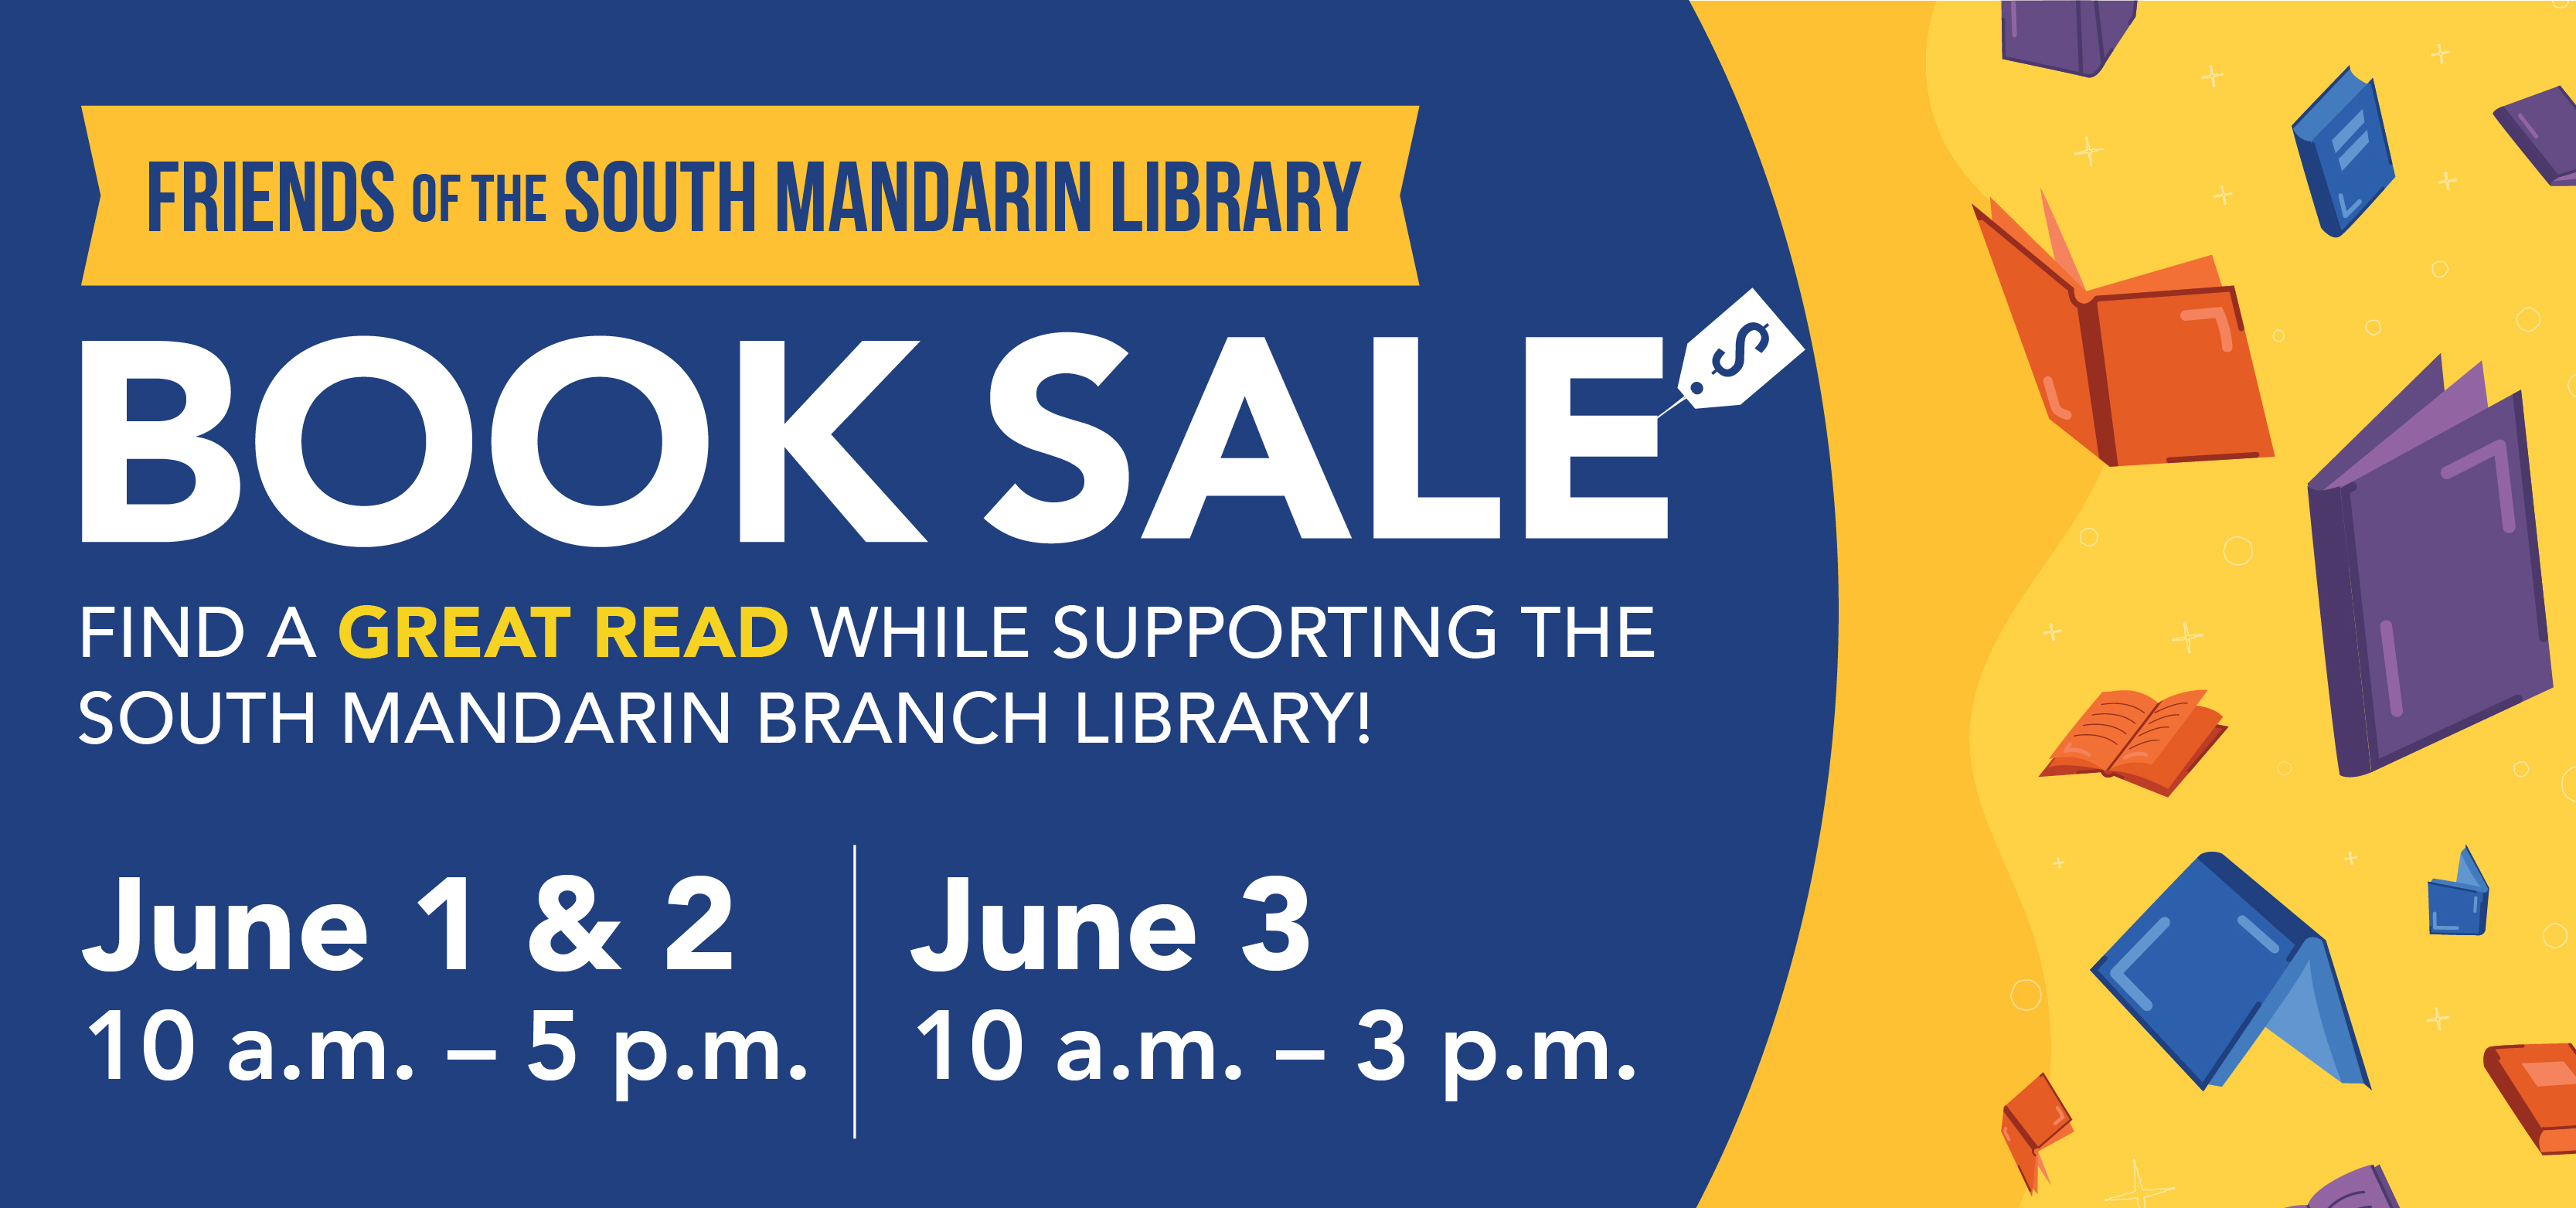 Friends of South Mandarin Library book sale on June 1 to June 2 from 10 am to 5 pm and on June 3 from 10 am to 3 pm.